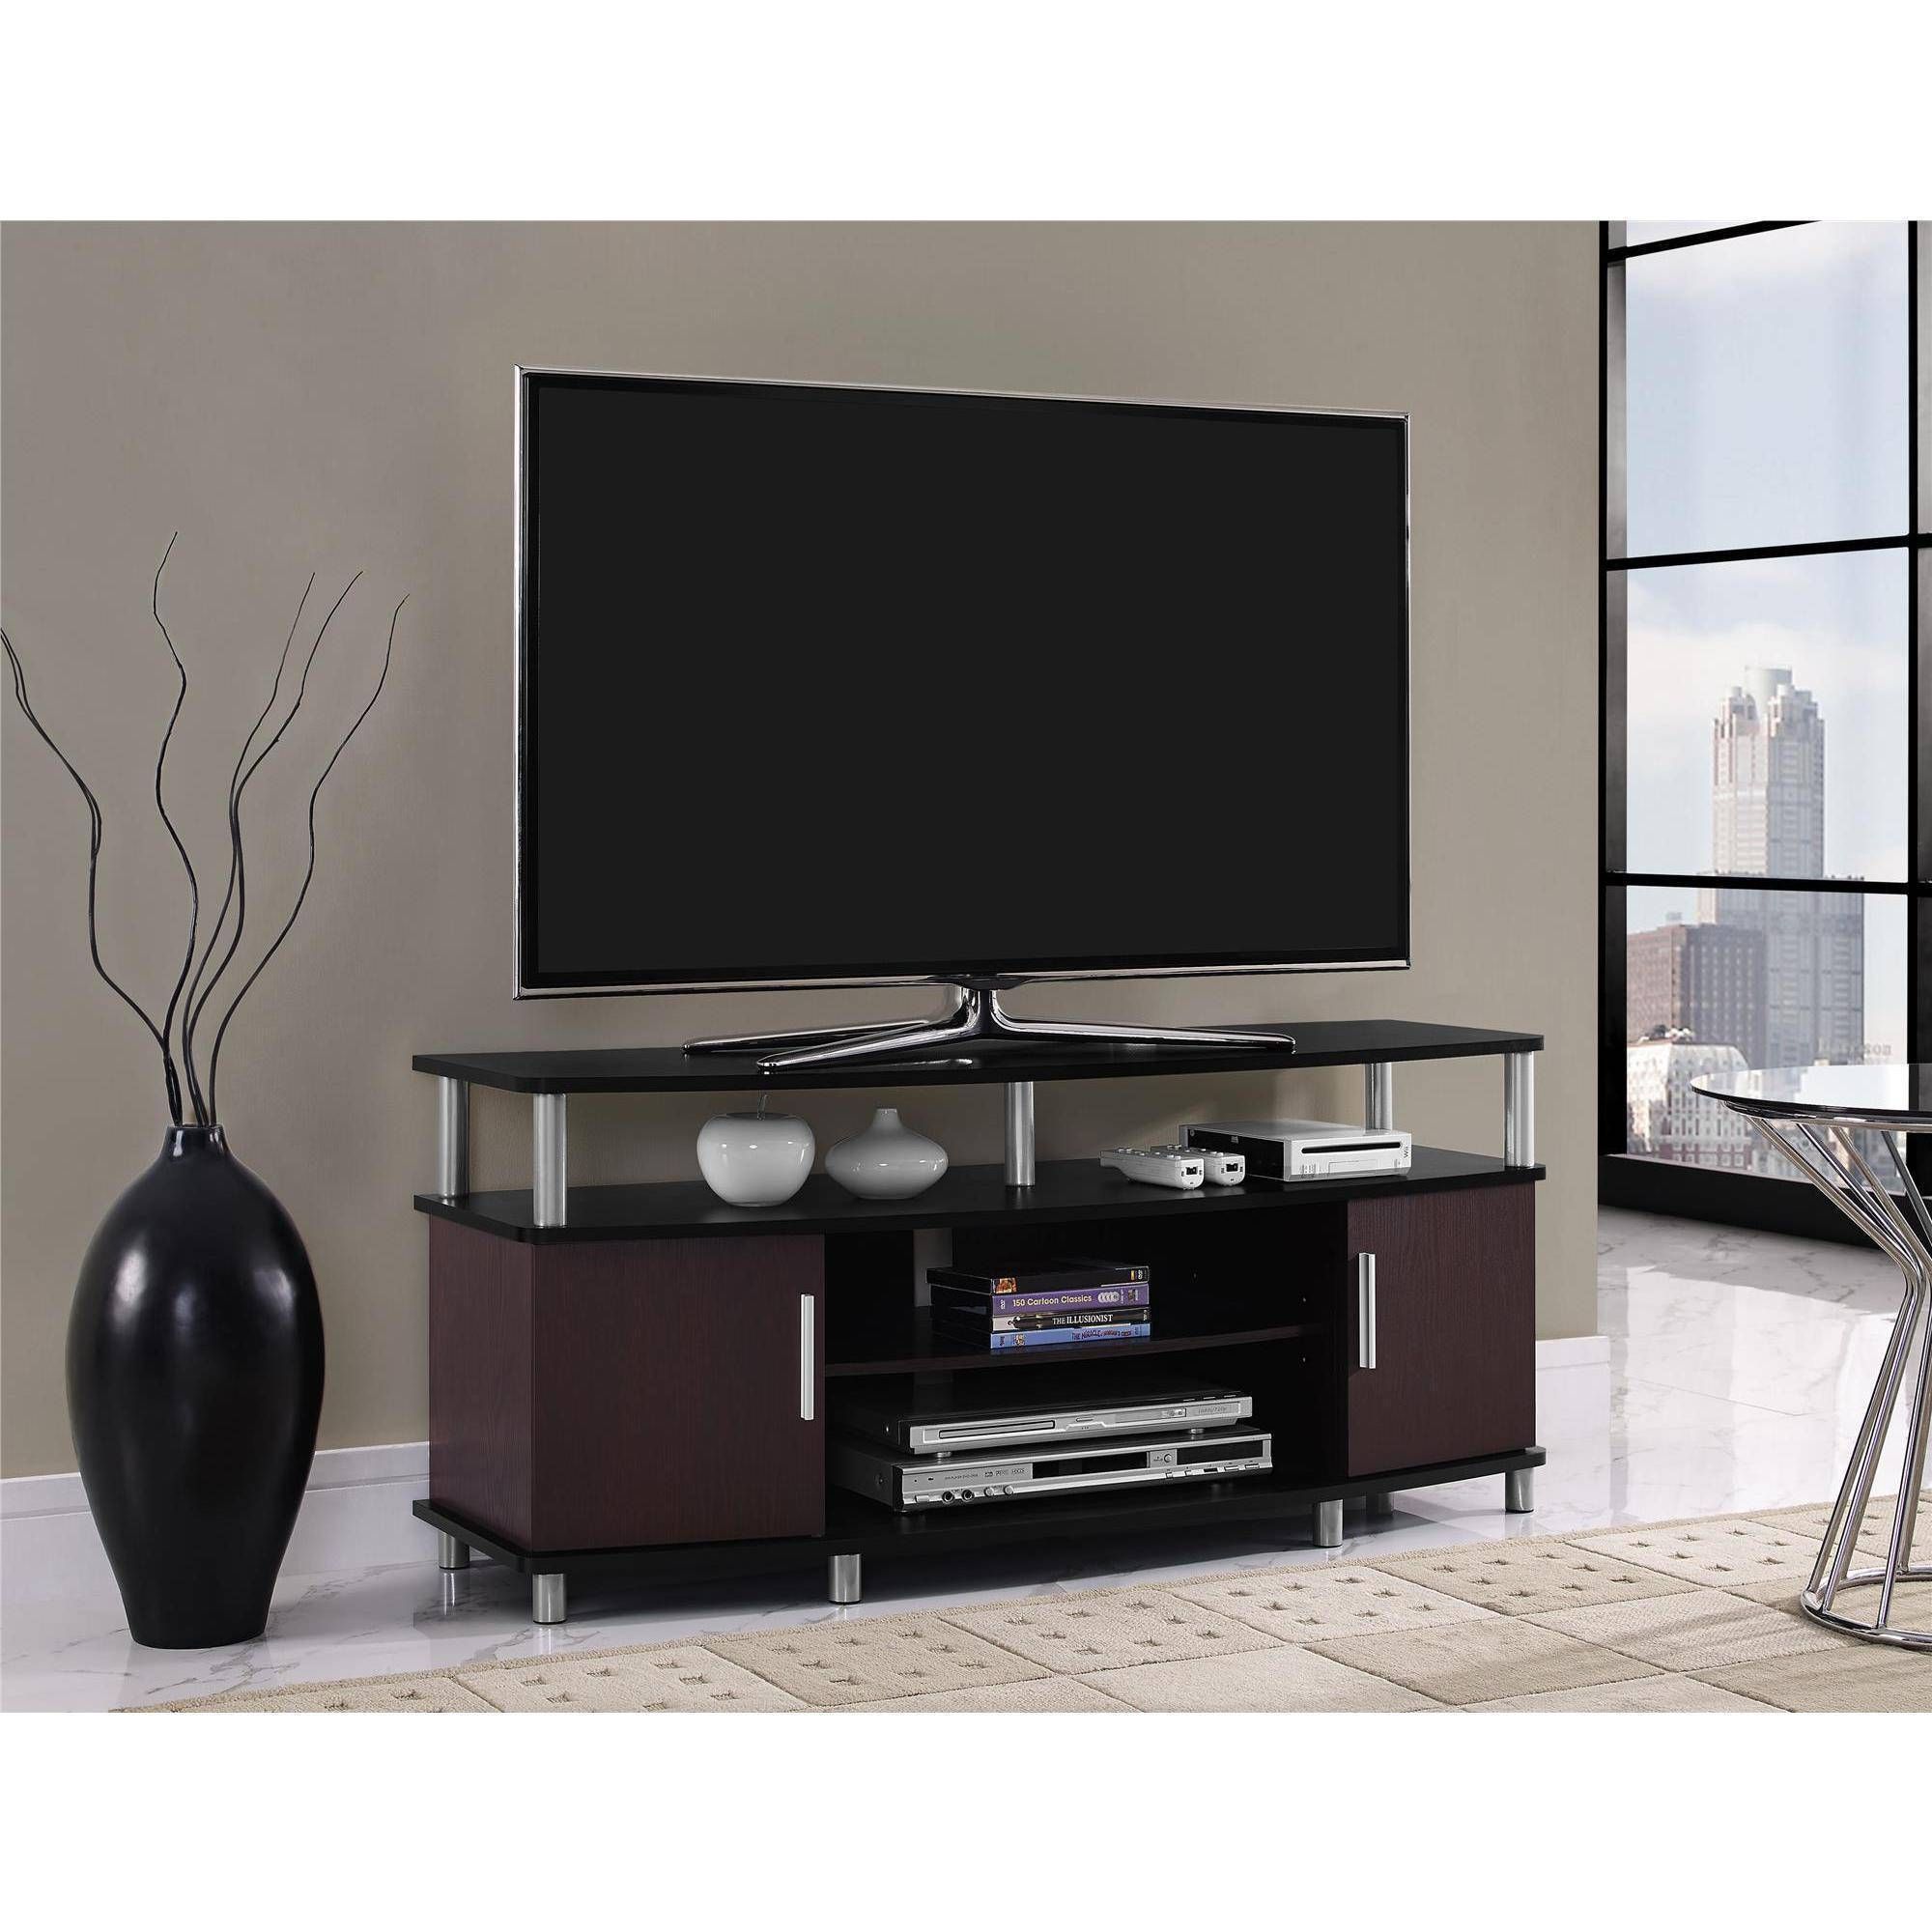 Surprising Light Wood Tv Stand 28 For New Trends With Light Wood With Regard To Light Cherry Tv Stands (View 9 of 15)